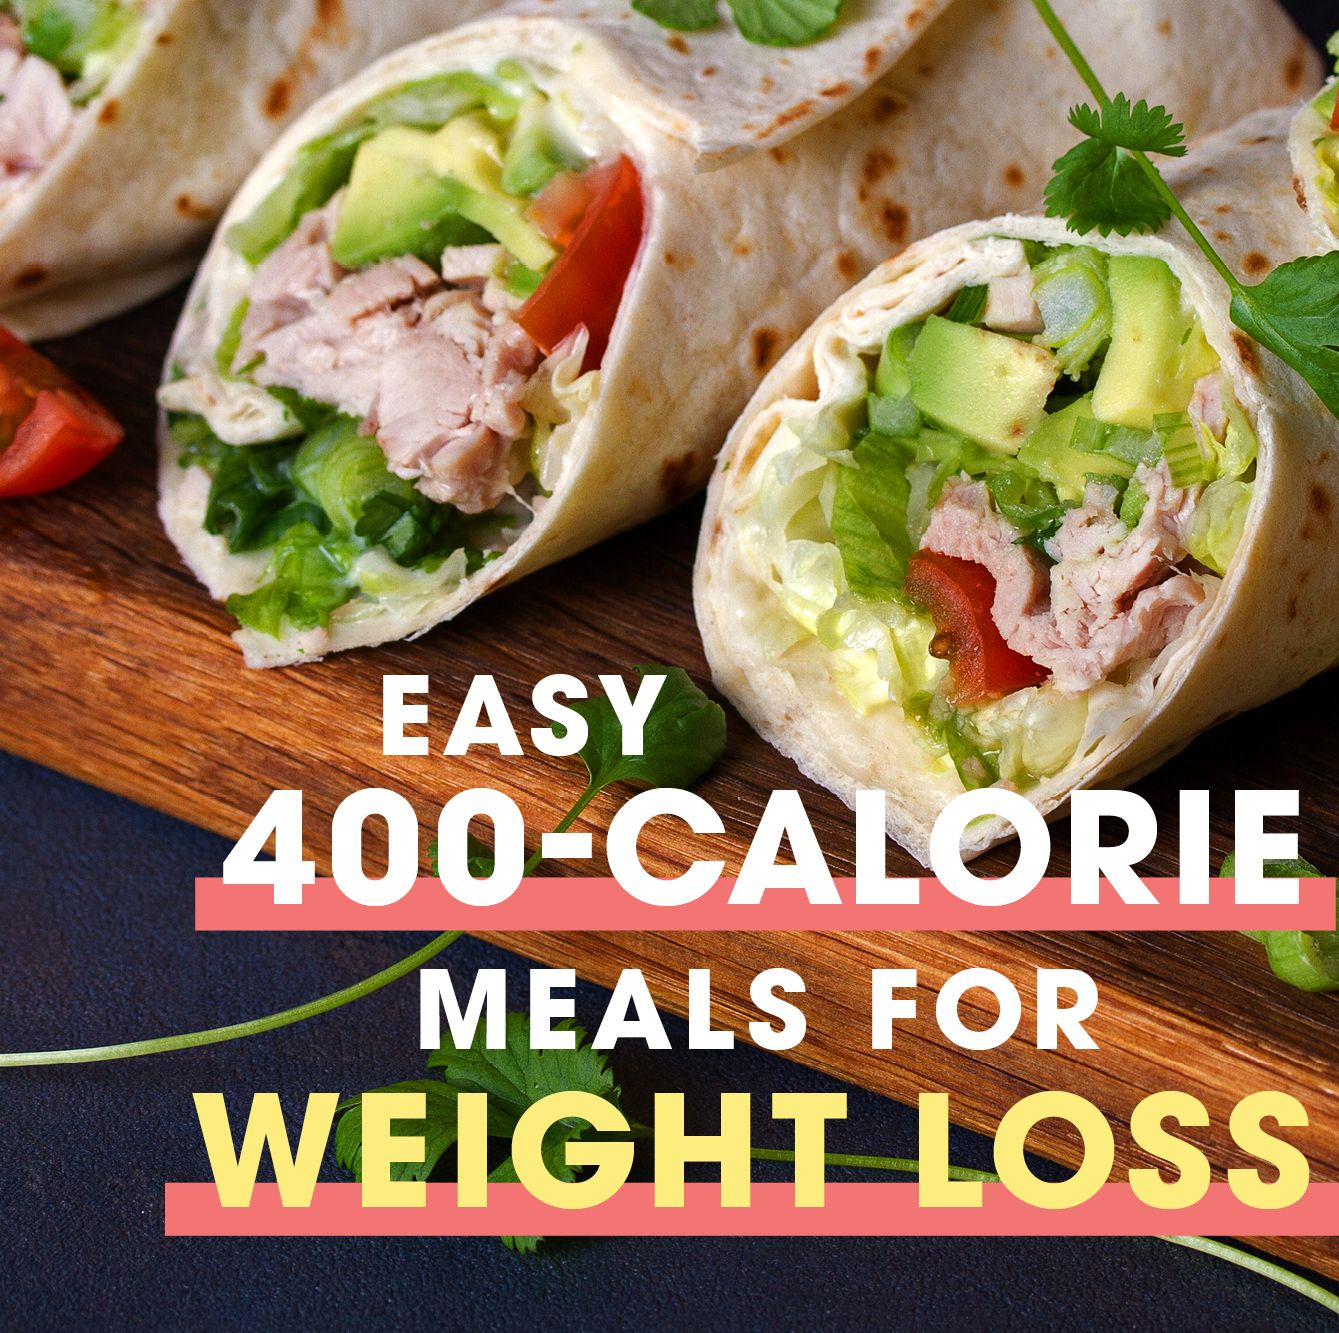 Try Our Our 400-Calorie Meal Guide for Weight Loss